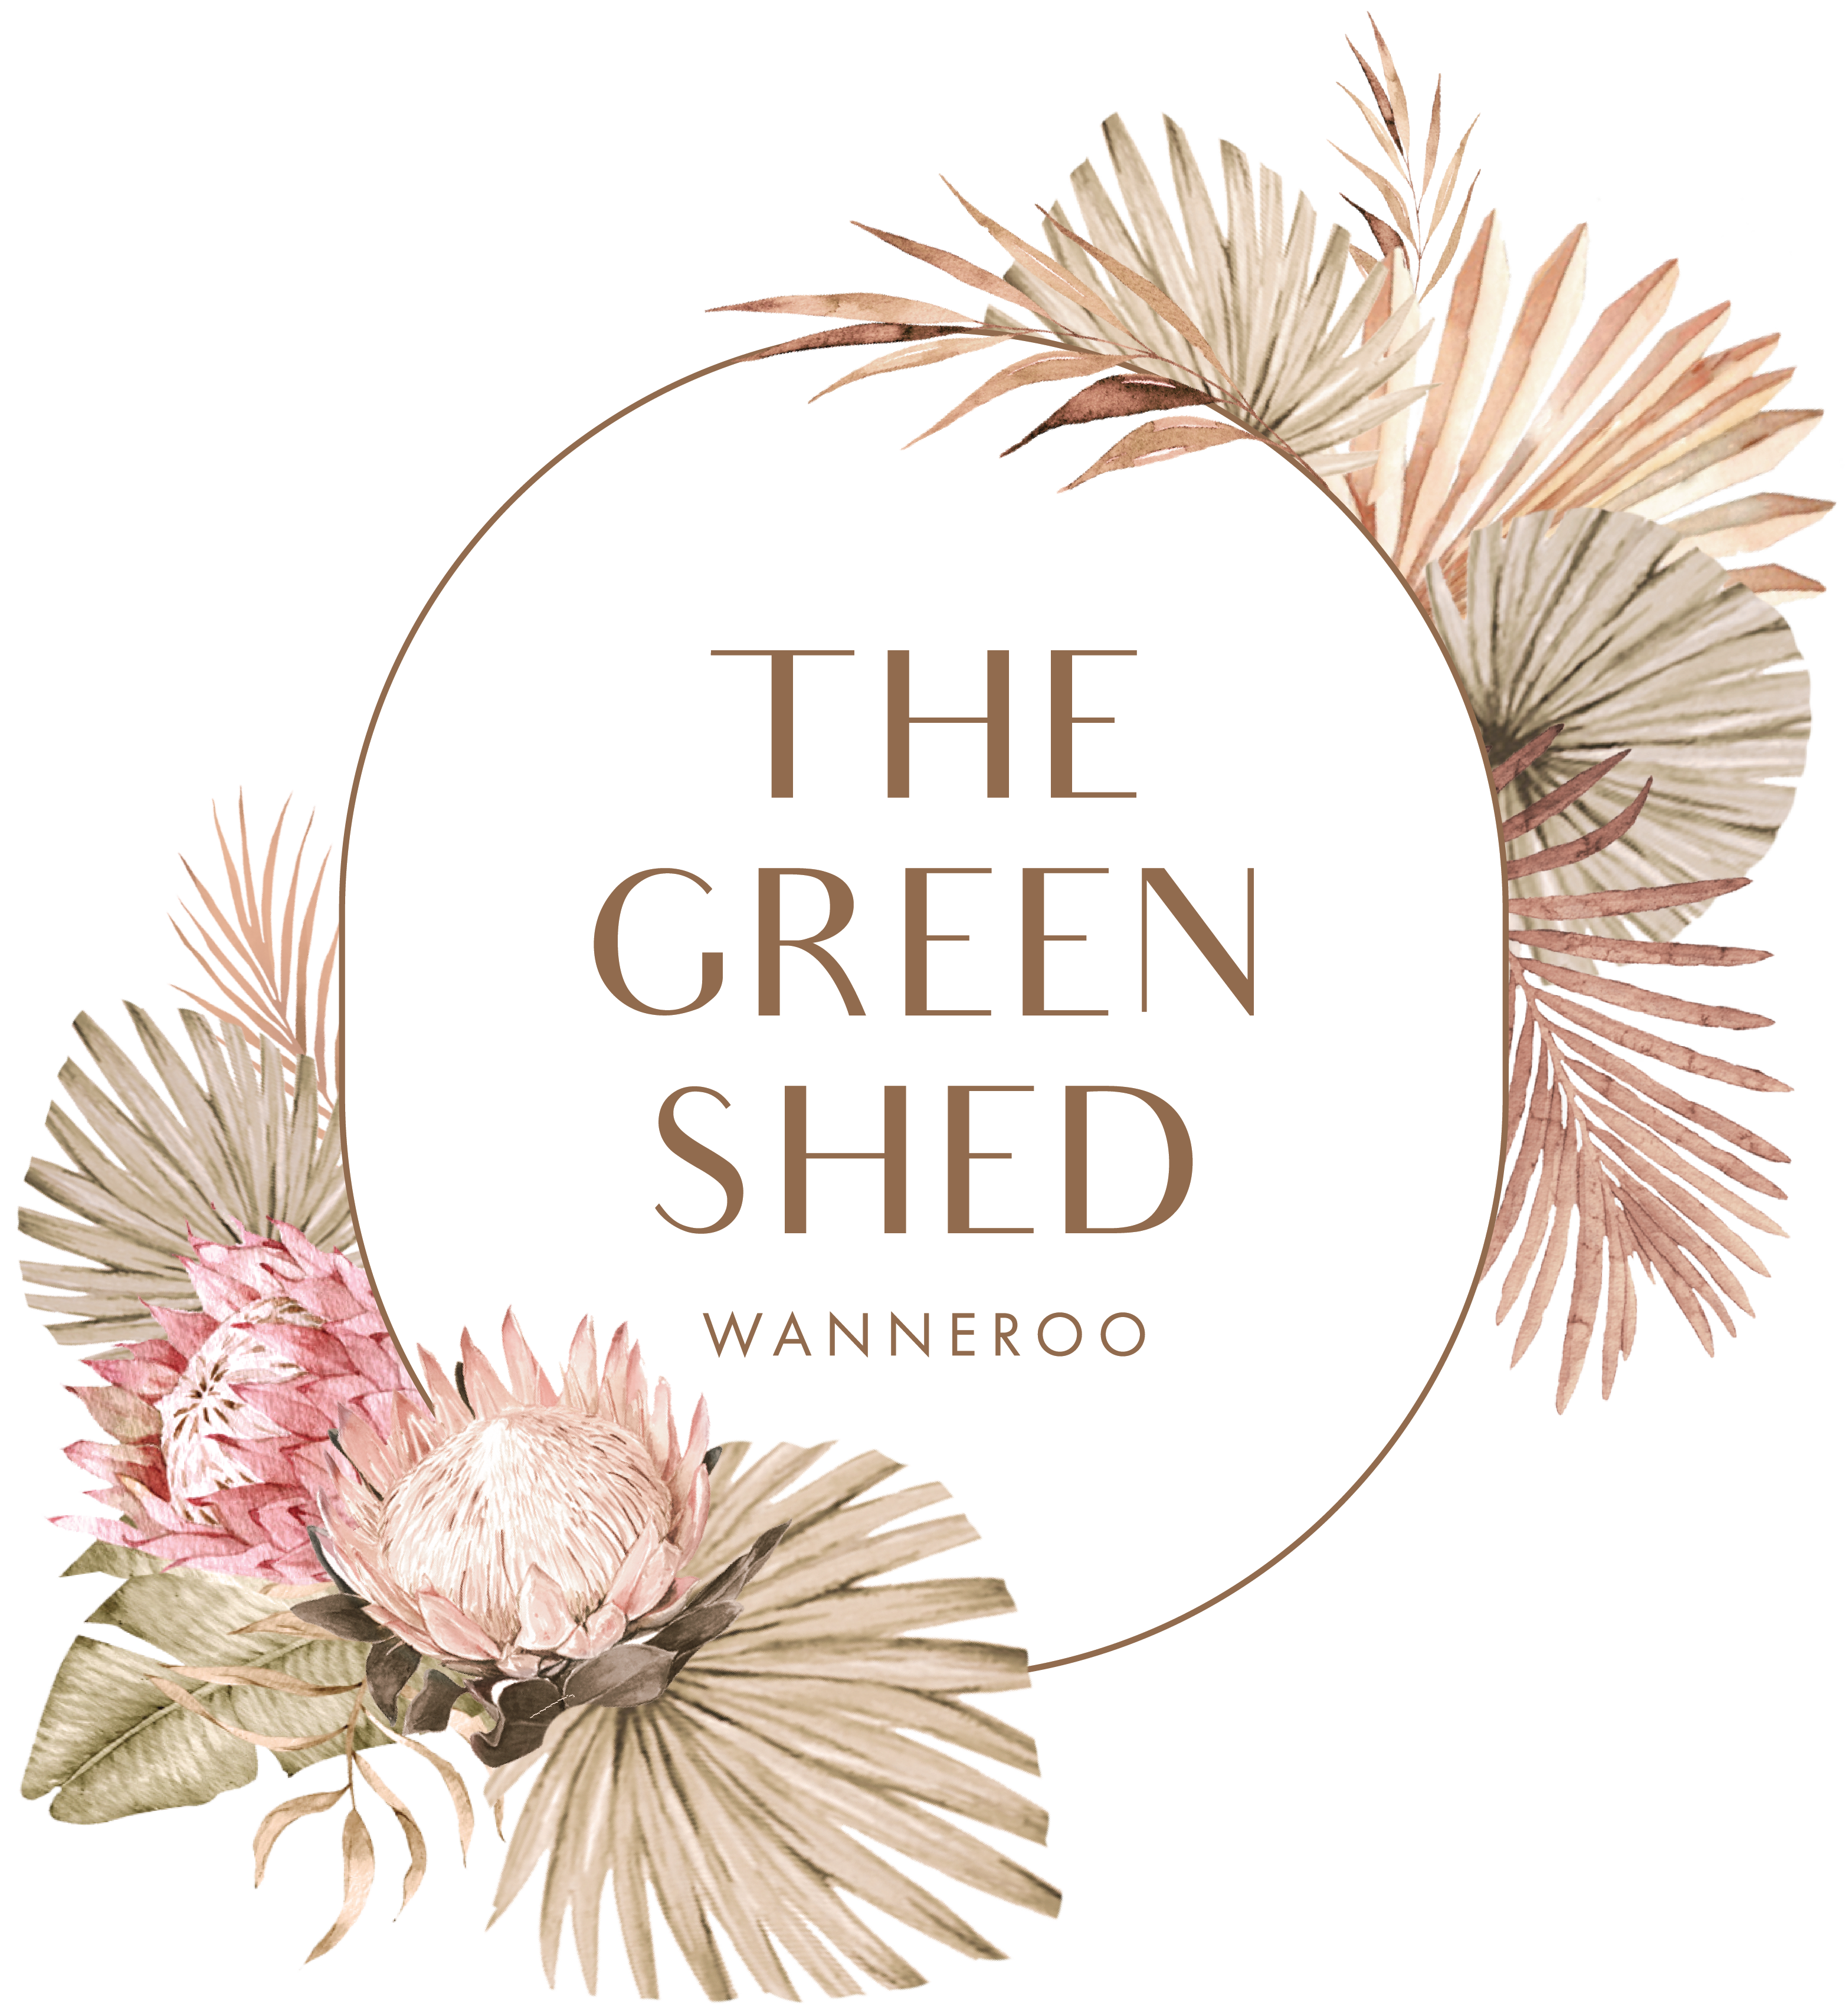 The Green Shed Wanneroo Perth Australia